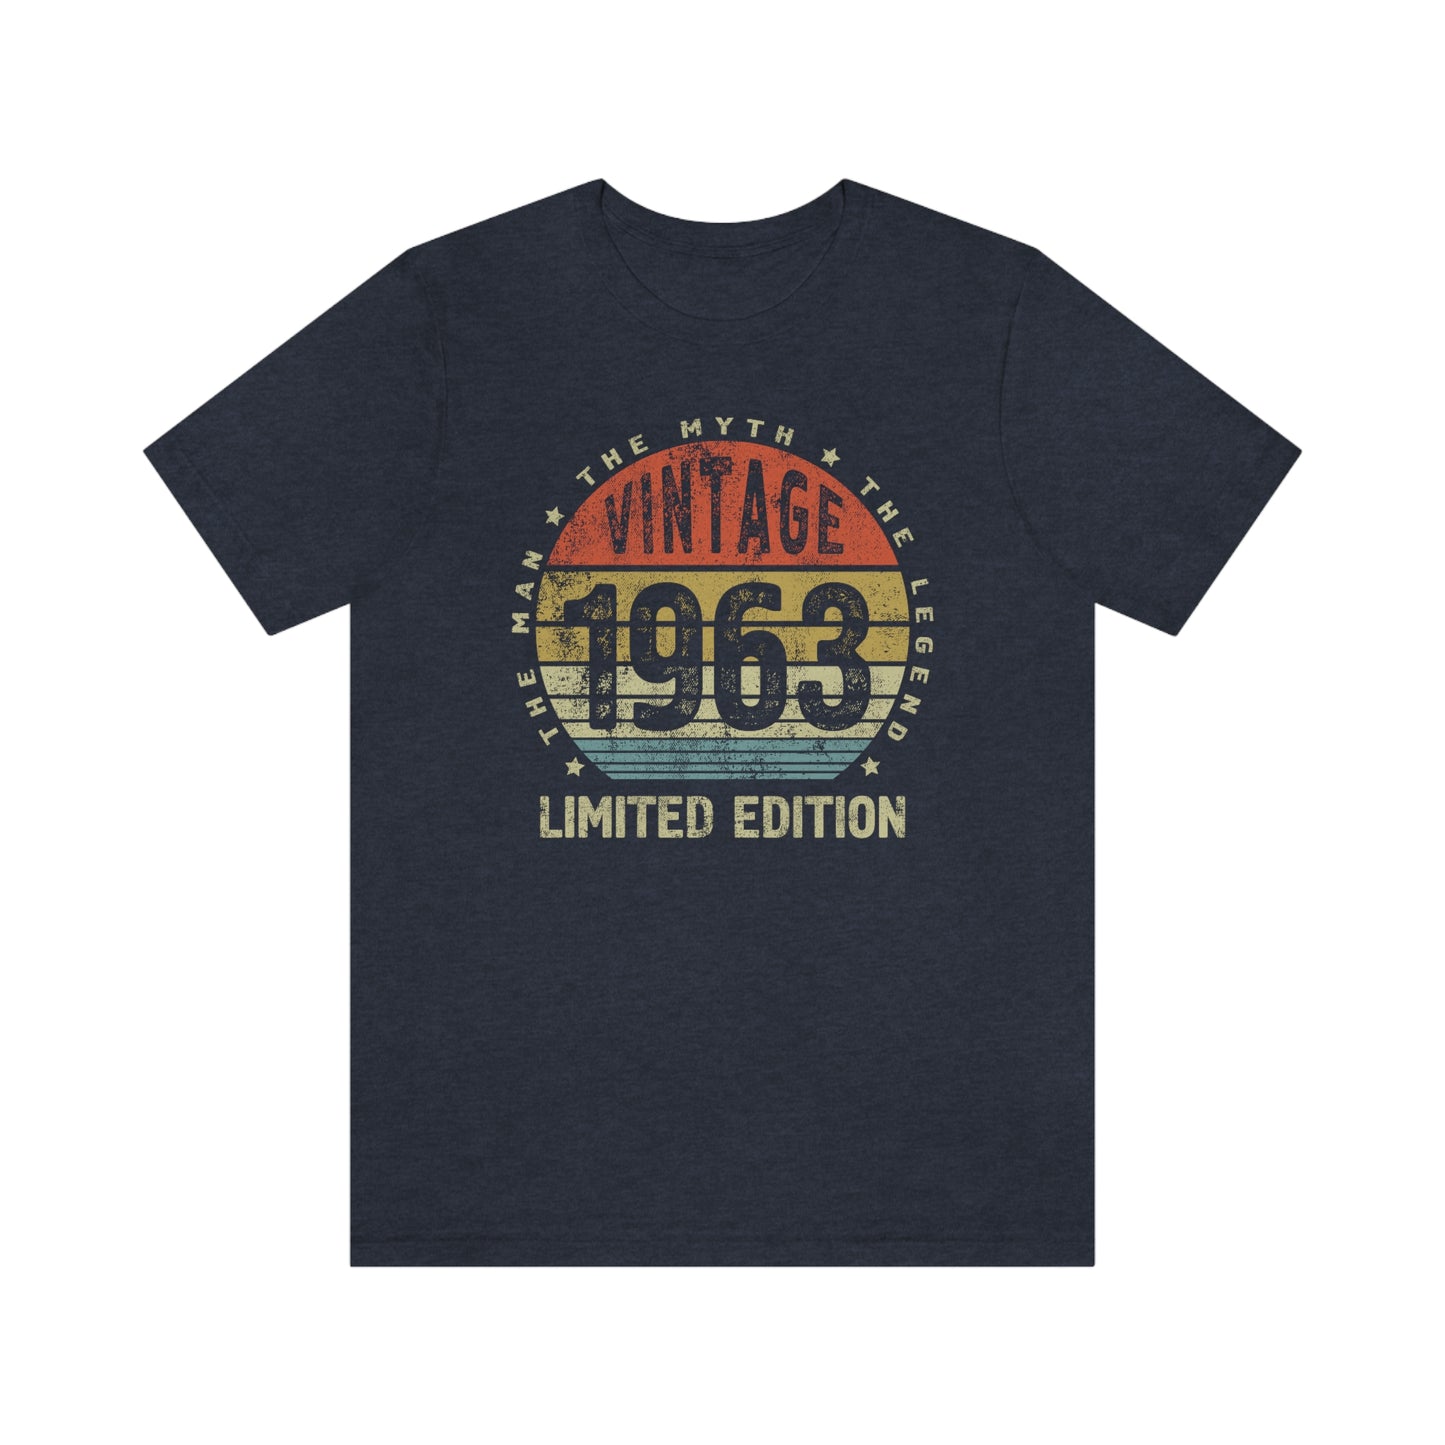 60th birthday gifts for men, Vintage 1963 Shirt for brother or husband,  The Men The Myth The Legend - 37 Design Unit